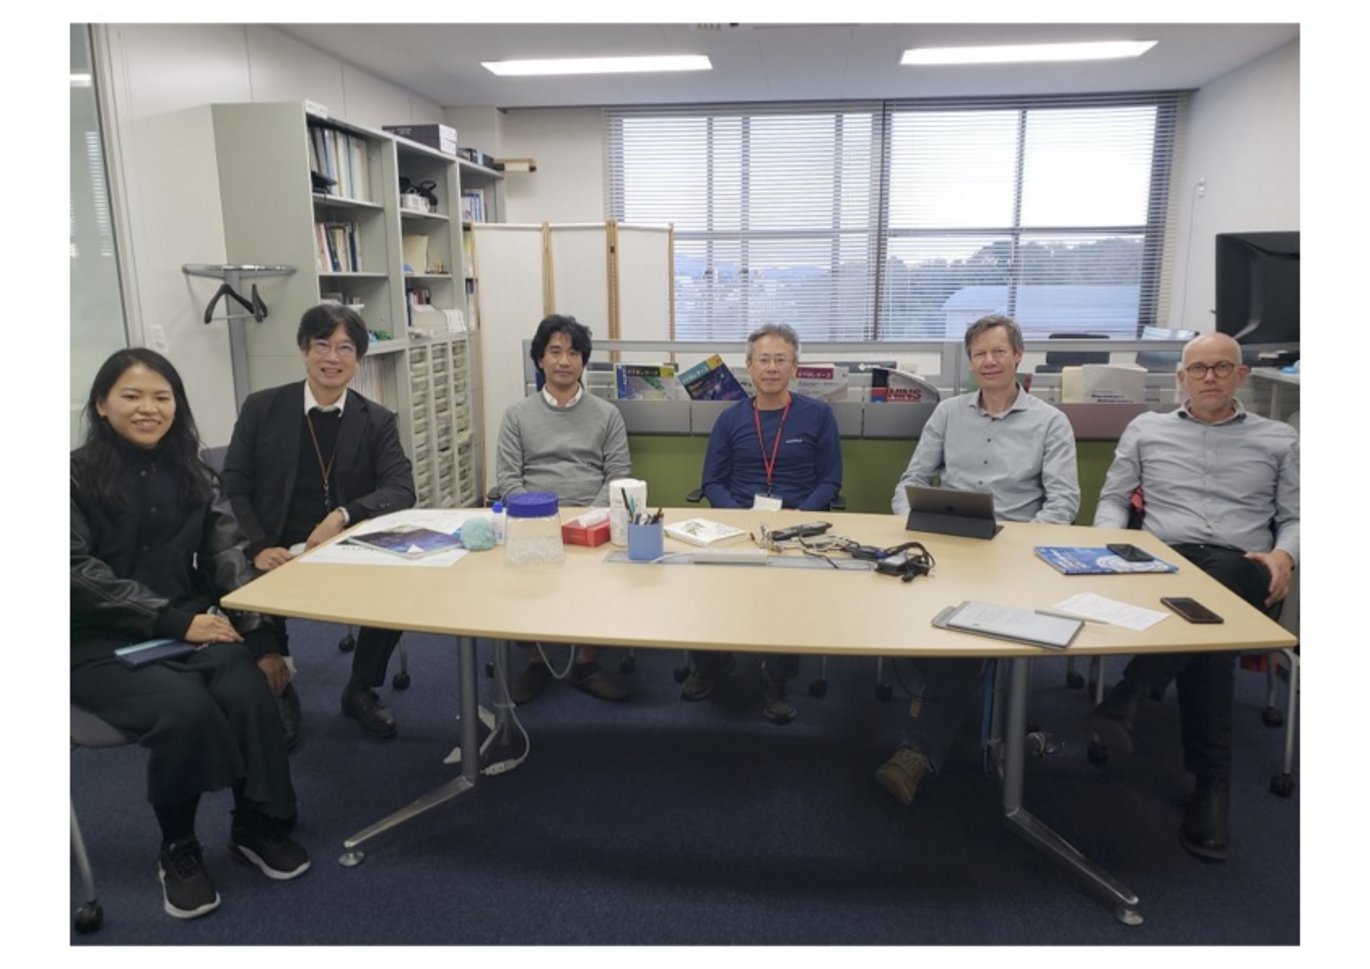 Frans Mulder and Daniel Otzen exploring new network opportunities at Institute for Molecular Science, National Institutes of Natural Sciences (Japan).